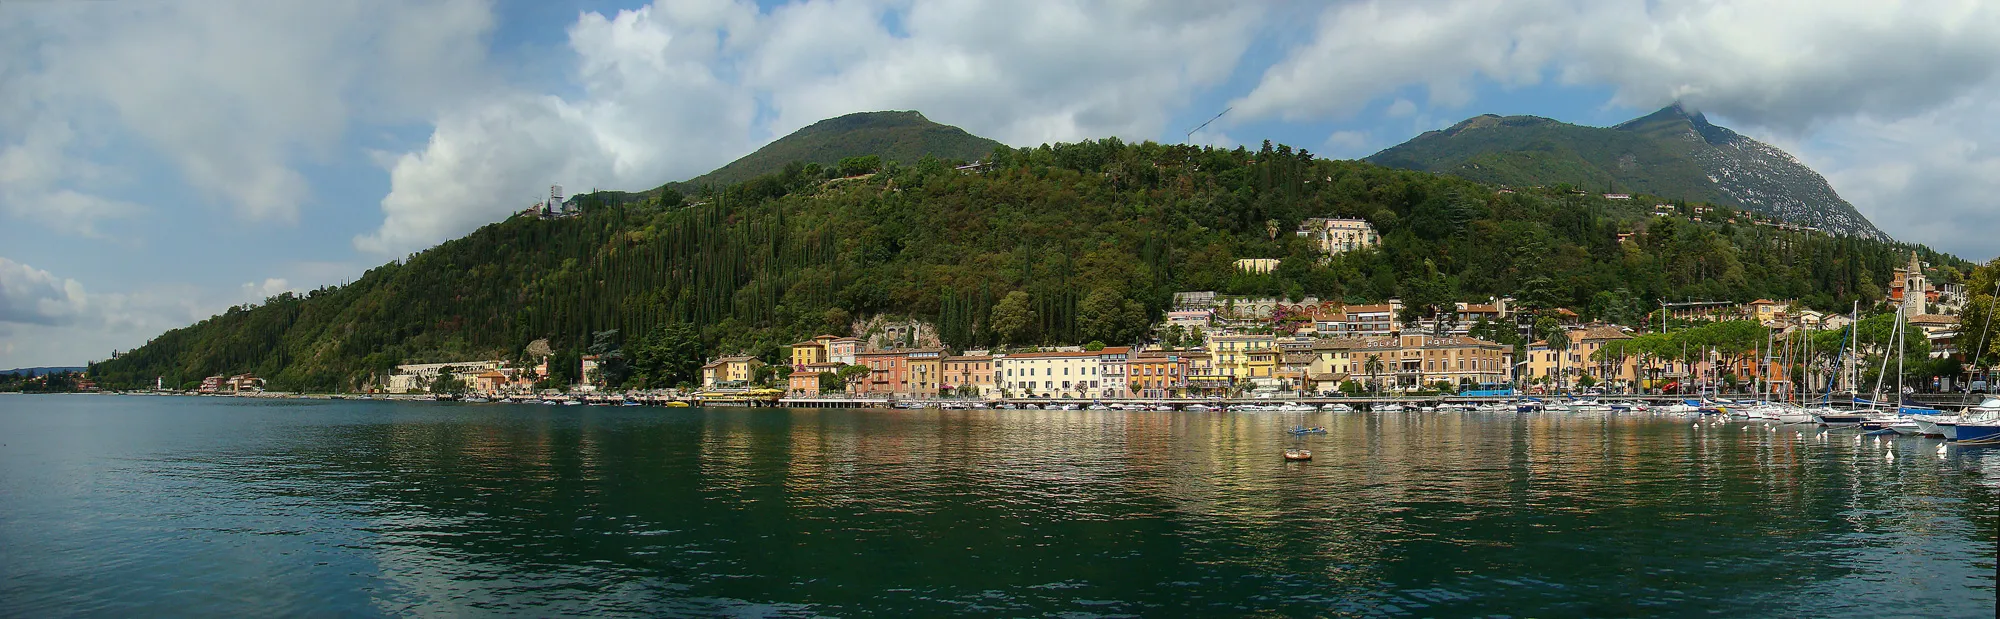 Image of Toscolano Maderno